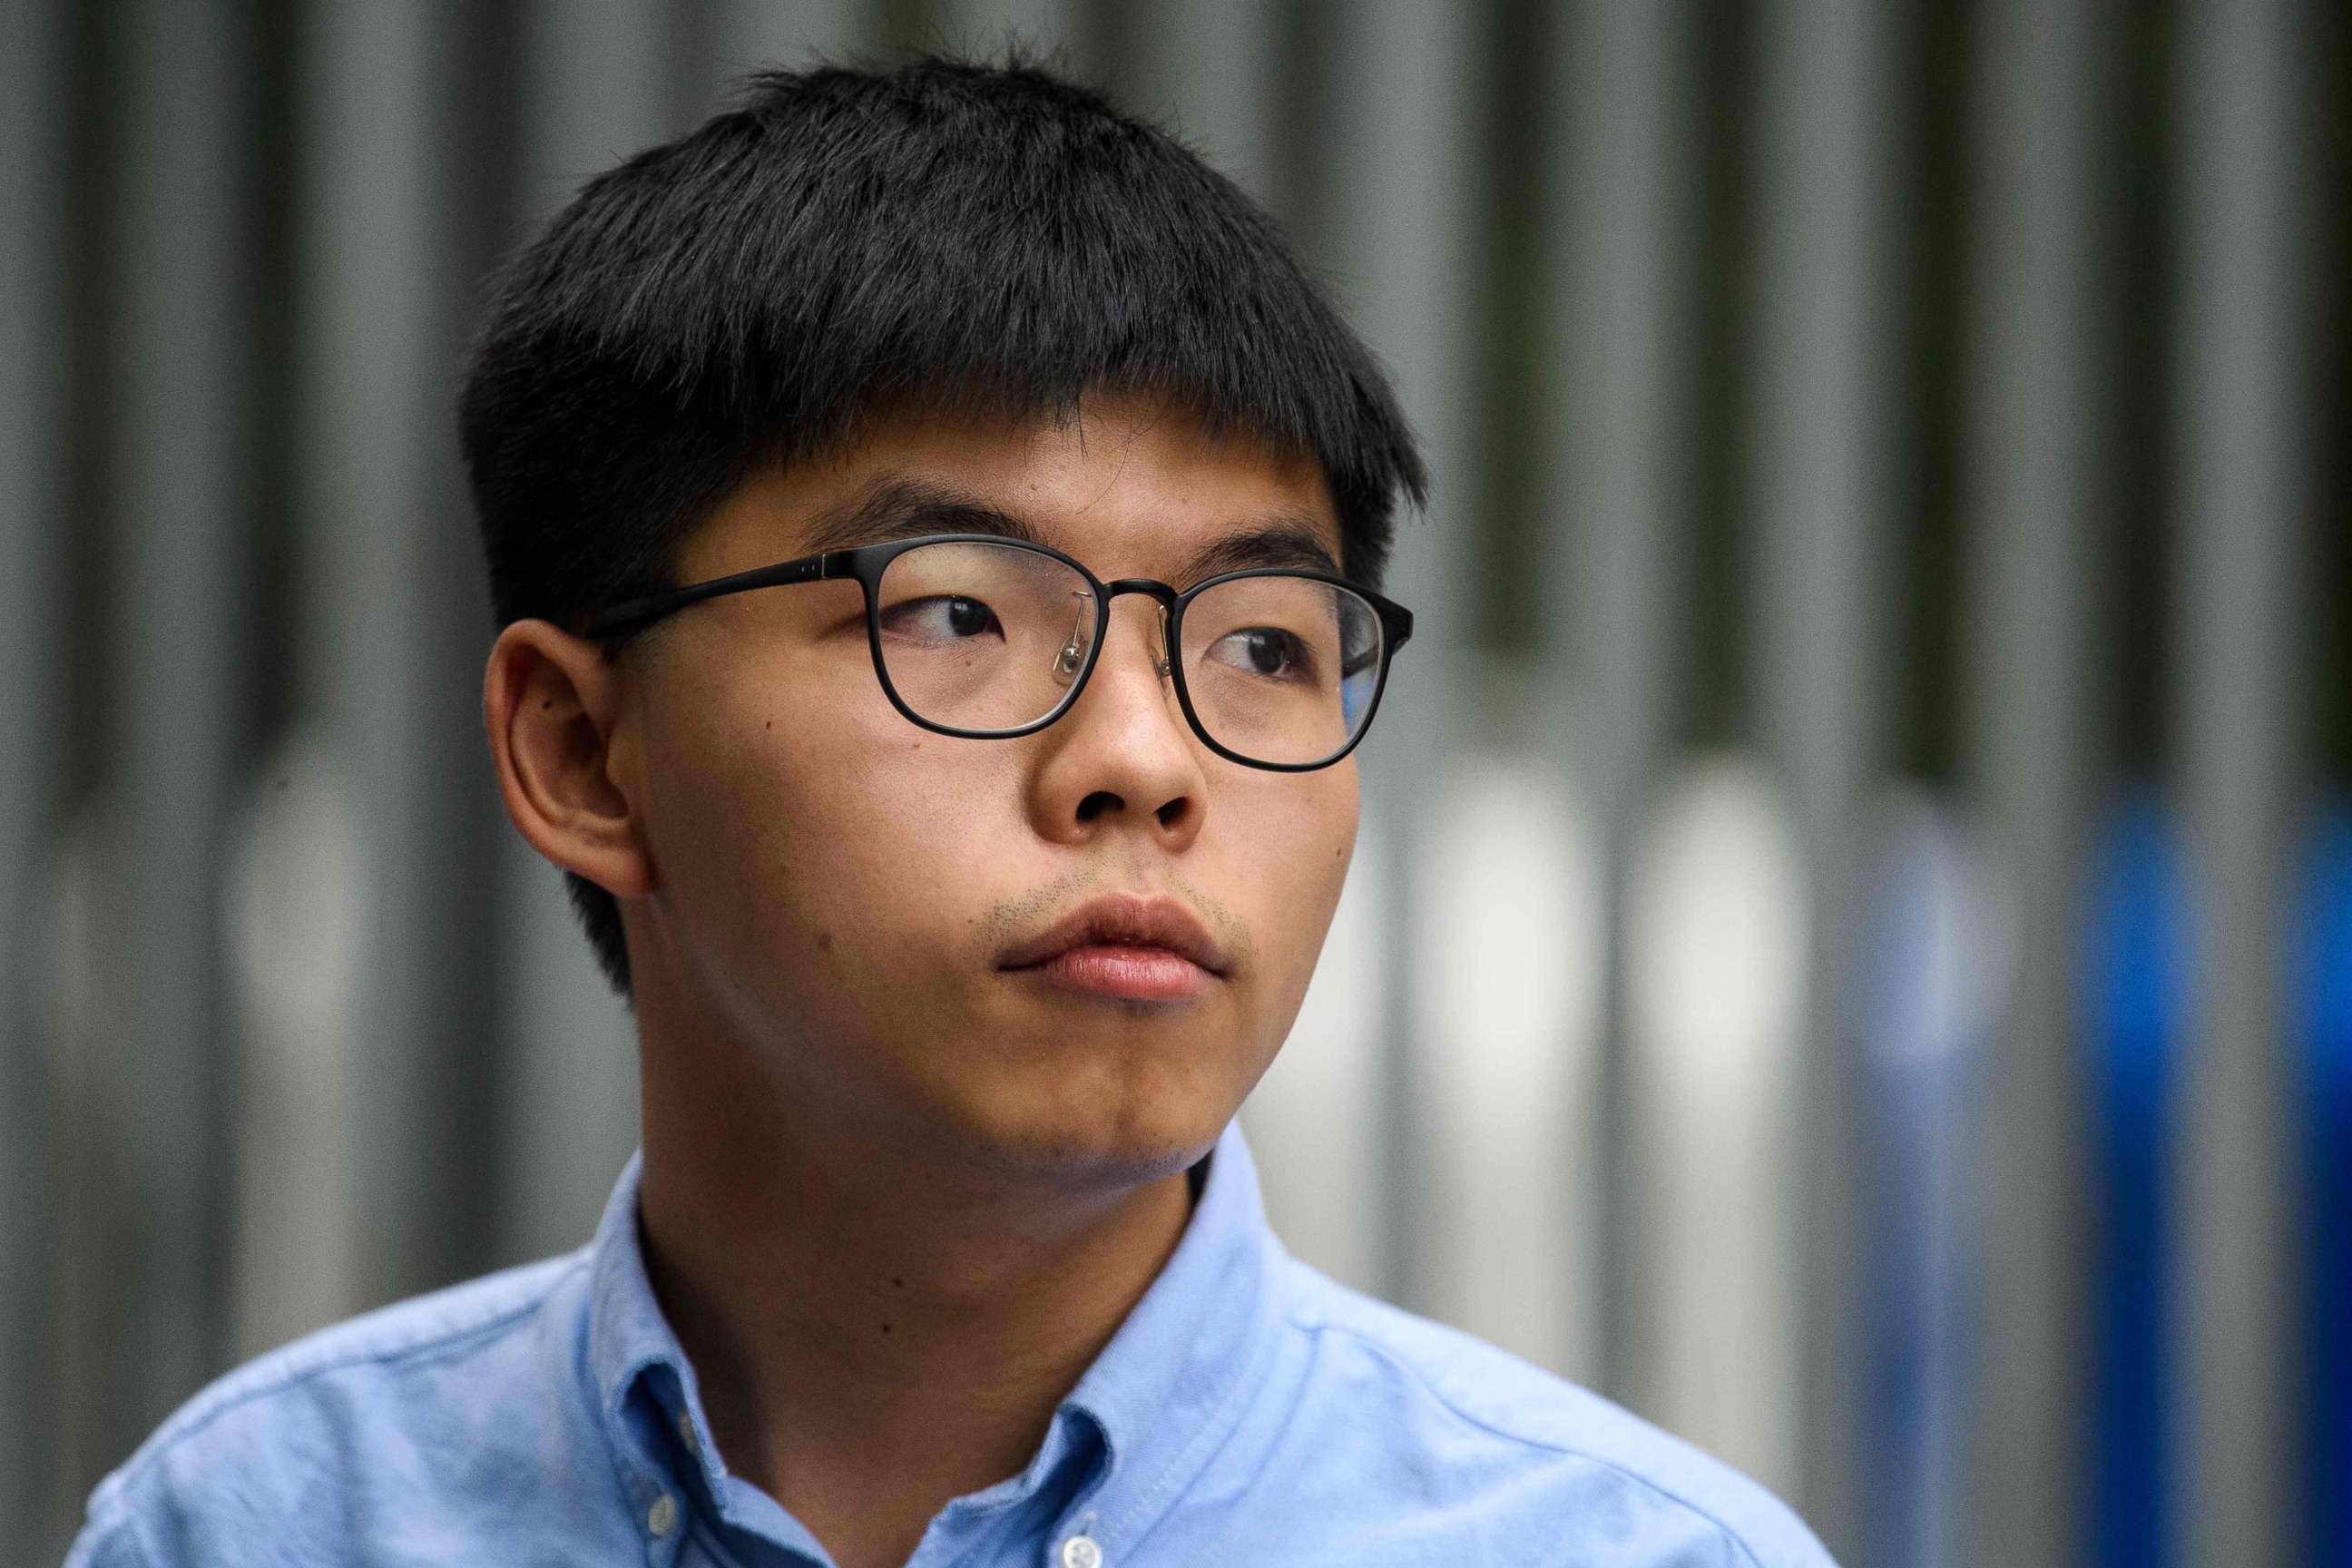 PHOTO: This file photo taken on October 29, 2019 shows pro-democracy activist Joshua Wong speaking to the media outside the Legislative Council (LegCo) in Hong Kong, after he was barred from standing in an upcoming local election.